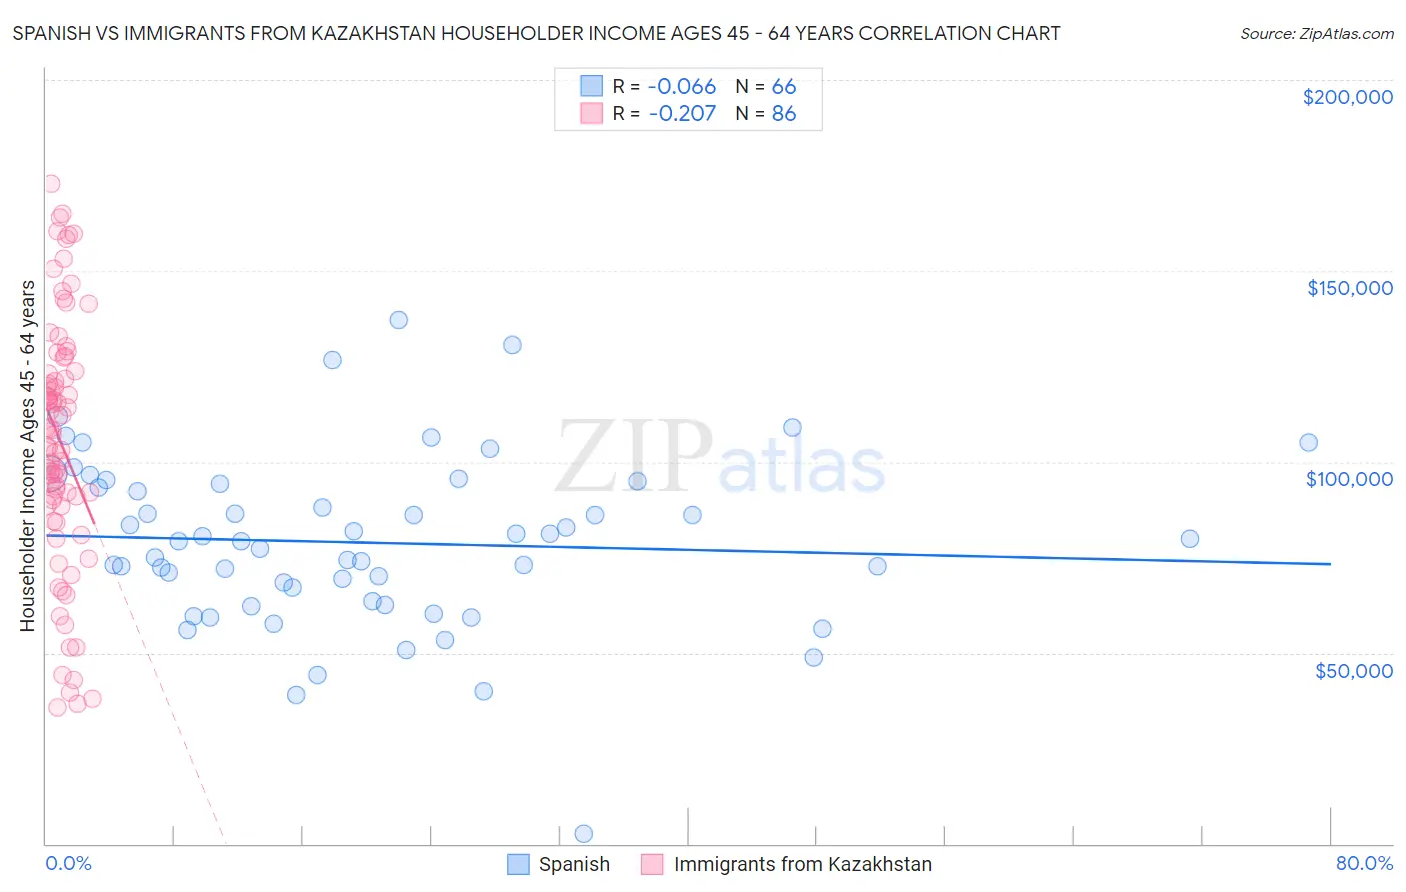 Spanish vs Immigrants from Kazakhstan Householder Income Ages 45 - 64 years